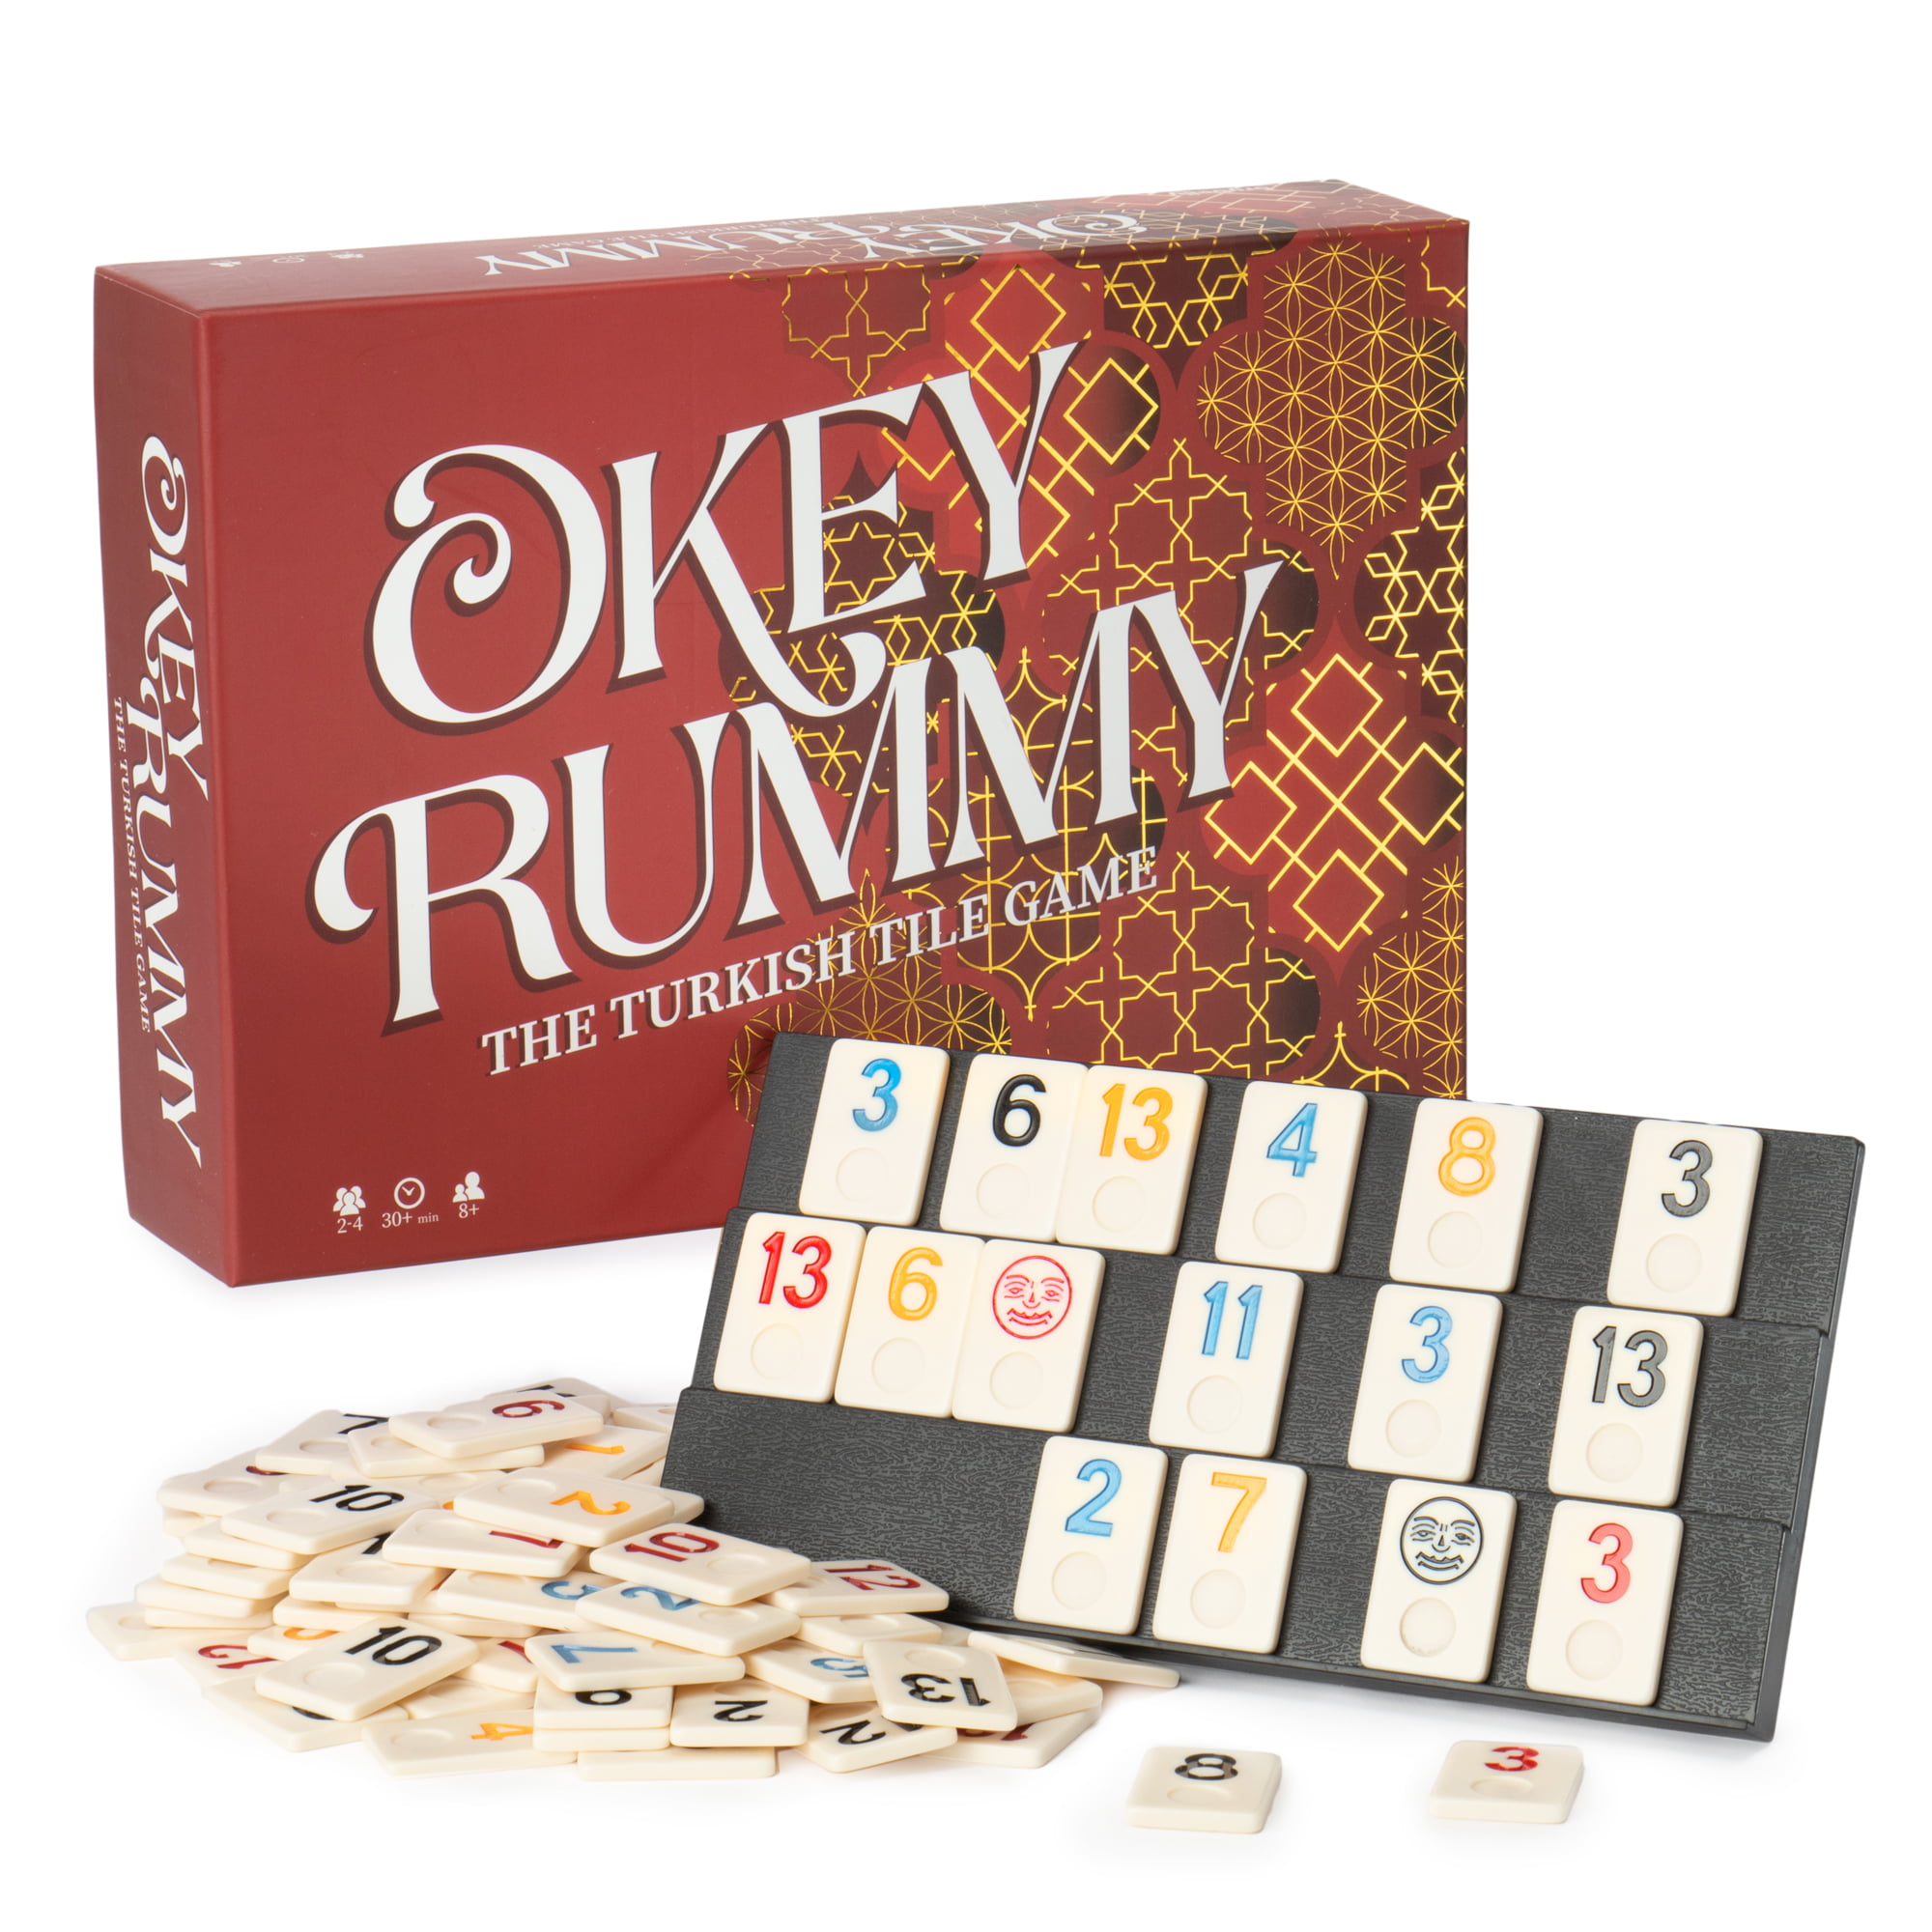 /& Seven Pairs Runs 2 False Jokers 1 Die Okey Rummy: The Turkish Tile Game /& Instructions Includes 104 Numbered Tiles Rummy-Style Draw /& Discard Family Board Game of Sets 4 Tile Holders